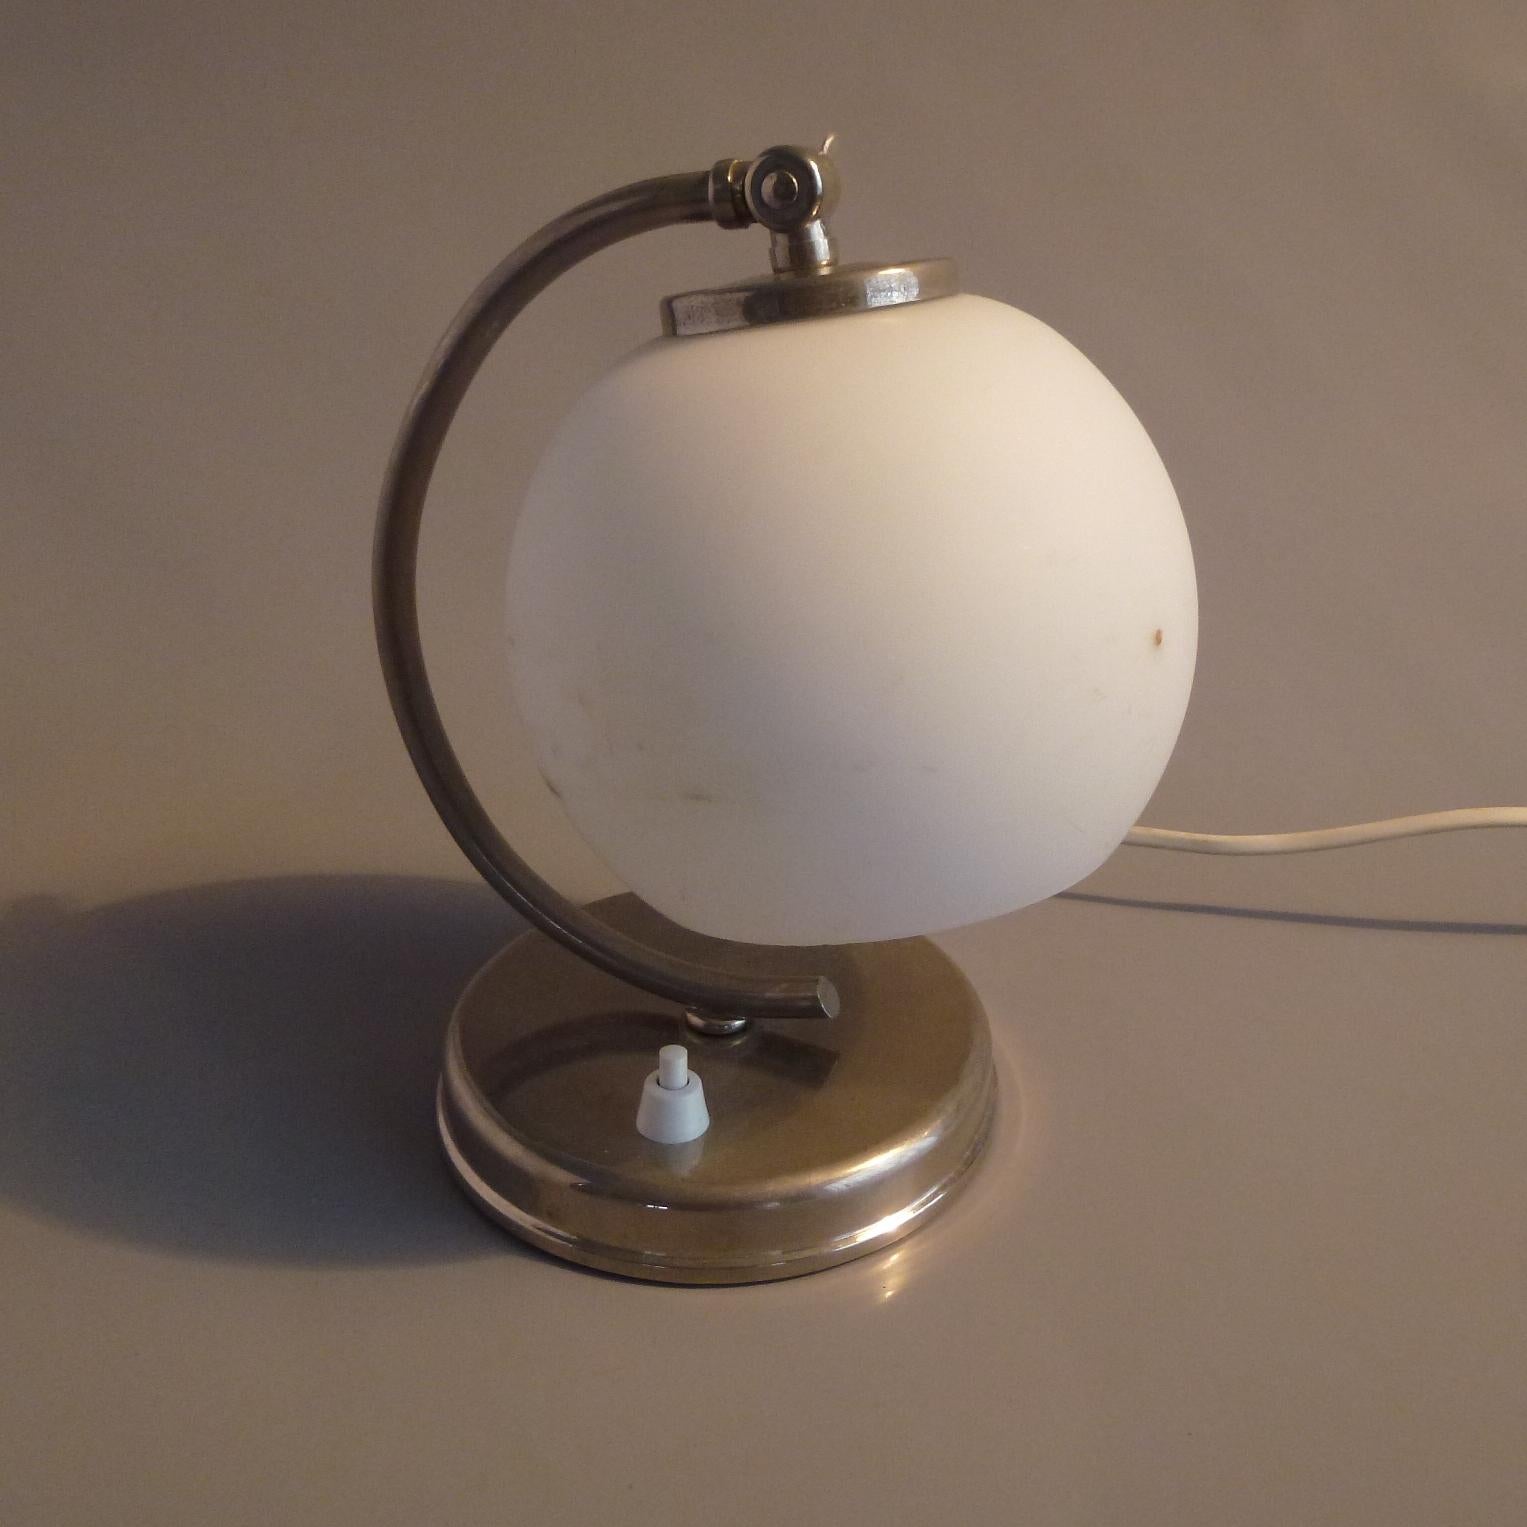 Art Deco table lamp in nickel-plated brass and milk glass sphere shade.
The lamp can be used as wall light too.
European one light bulb socket E27 compatible with UK and US standards.
European 2 pin plug.